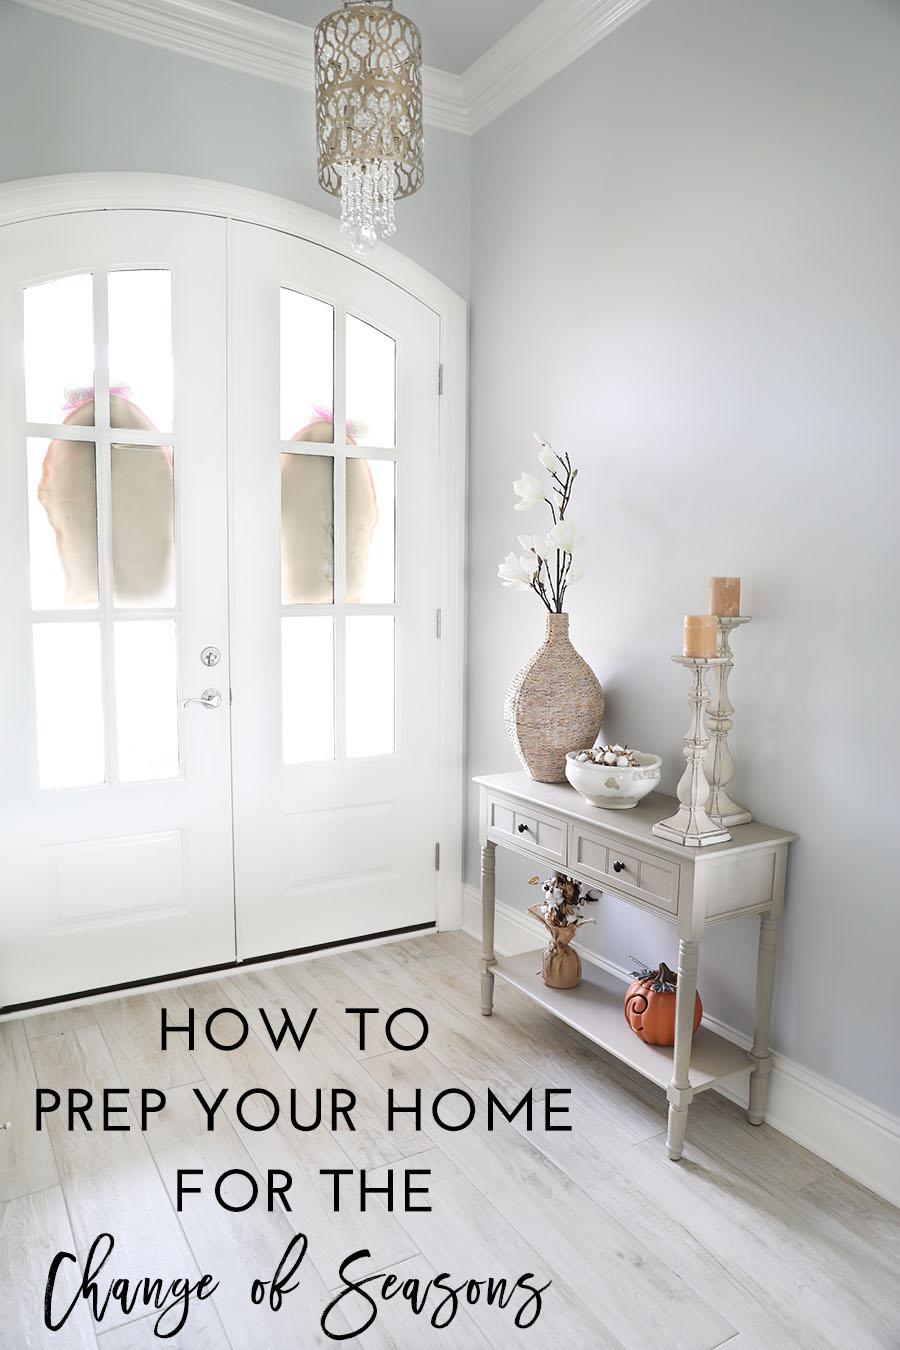 How to Prep Your Home for the Change of Seasons - Winter Home Prep Checklist